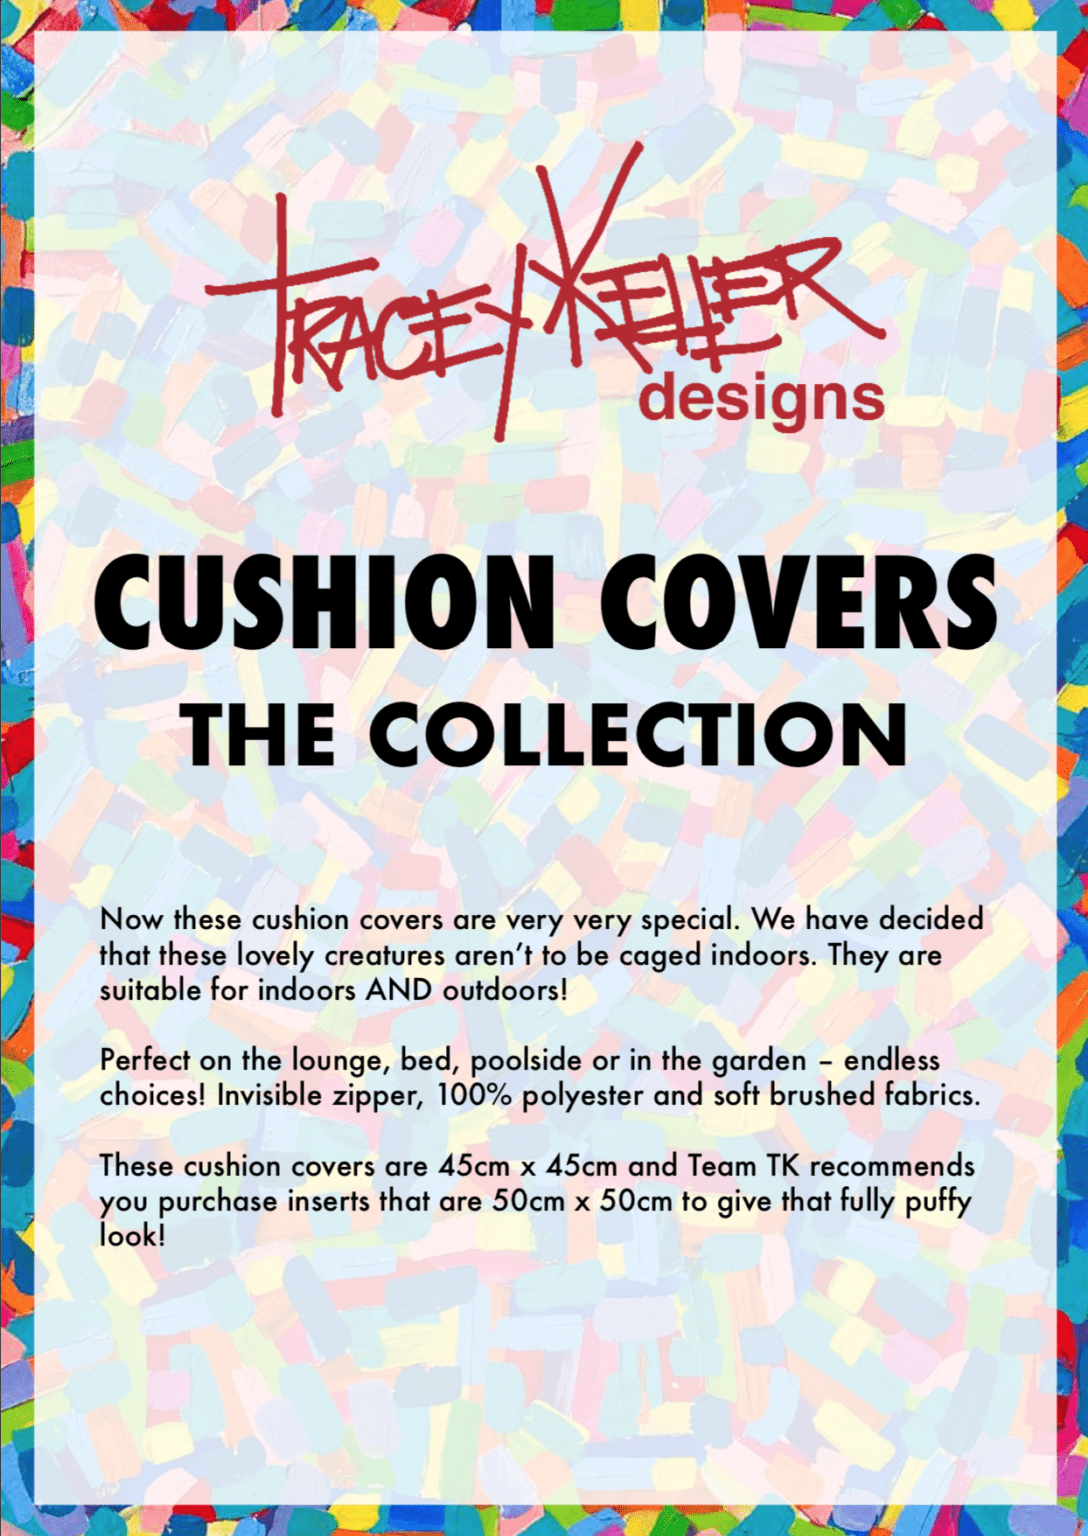 cushion covers collection 1088x1536 1